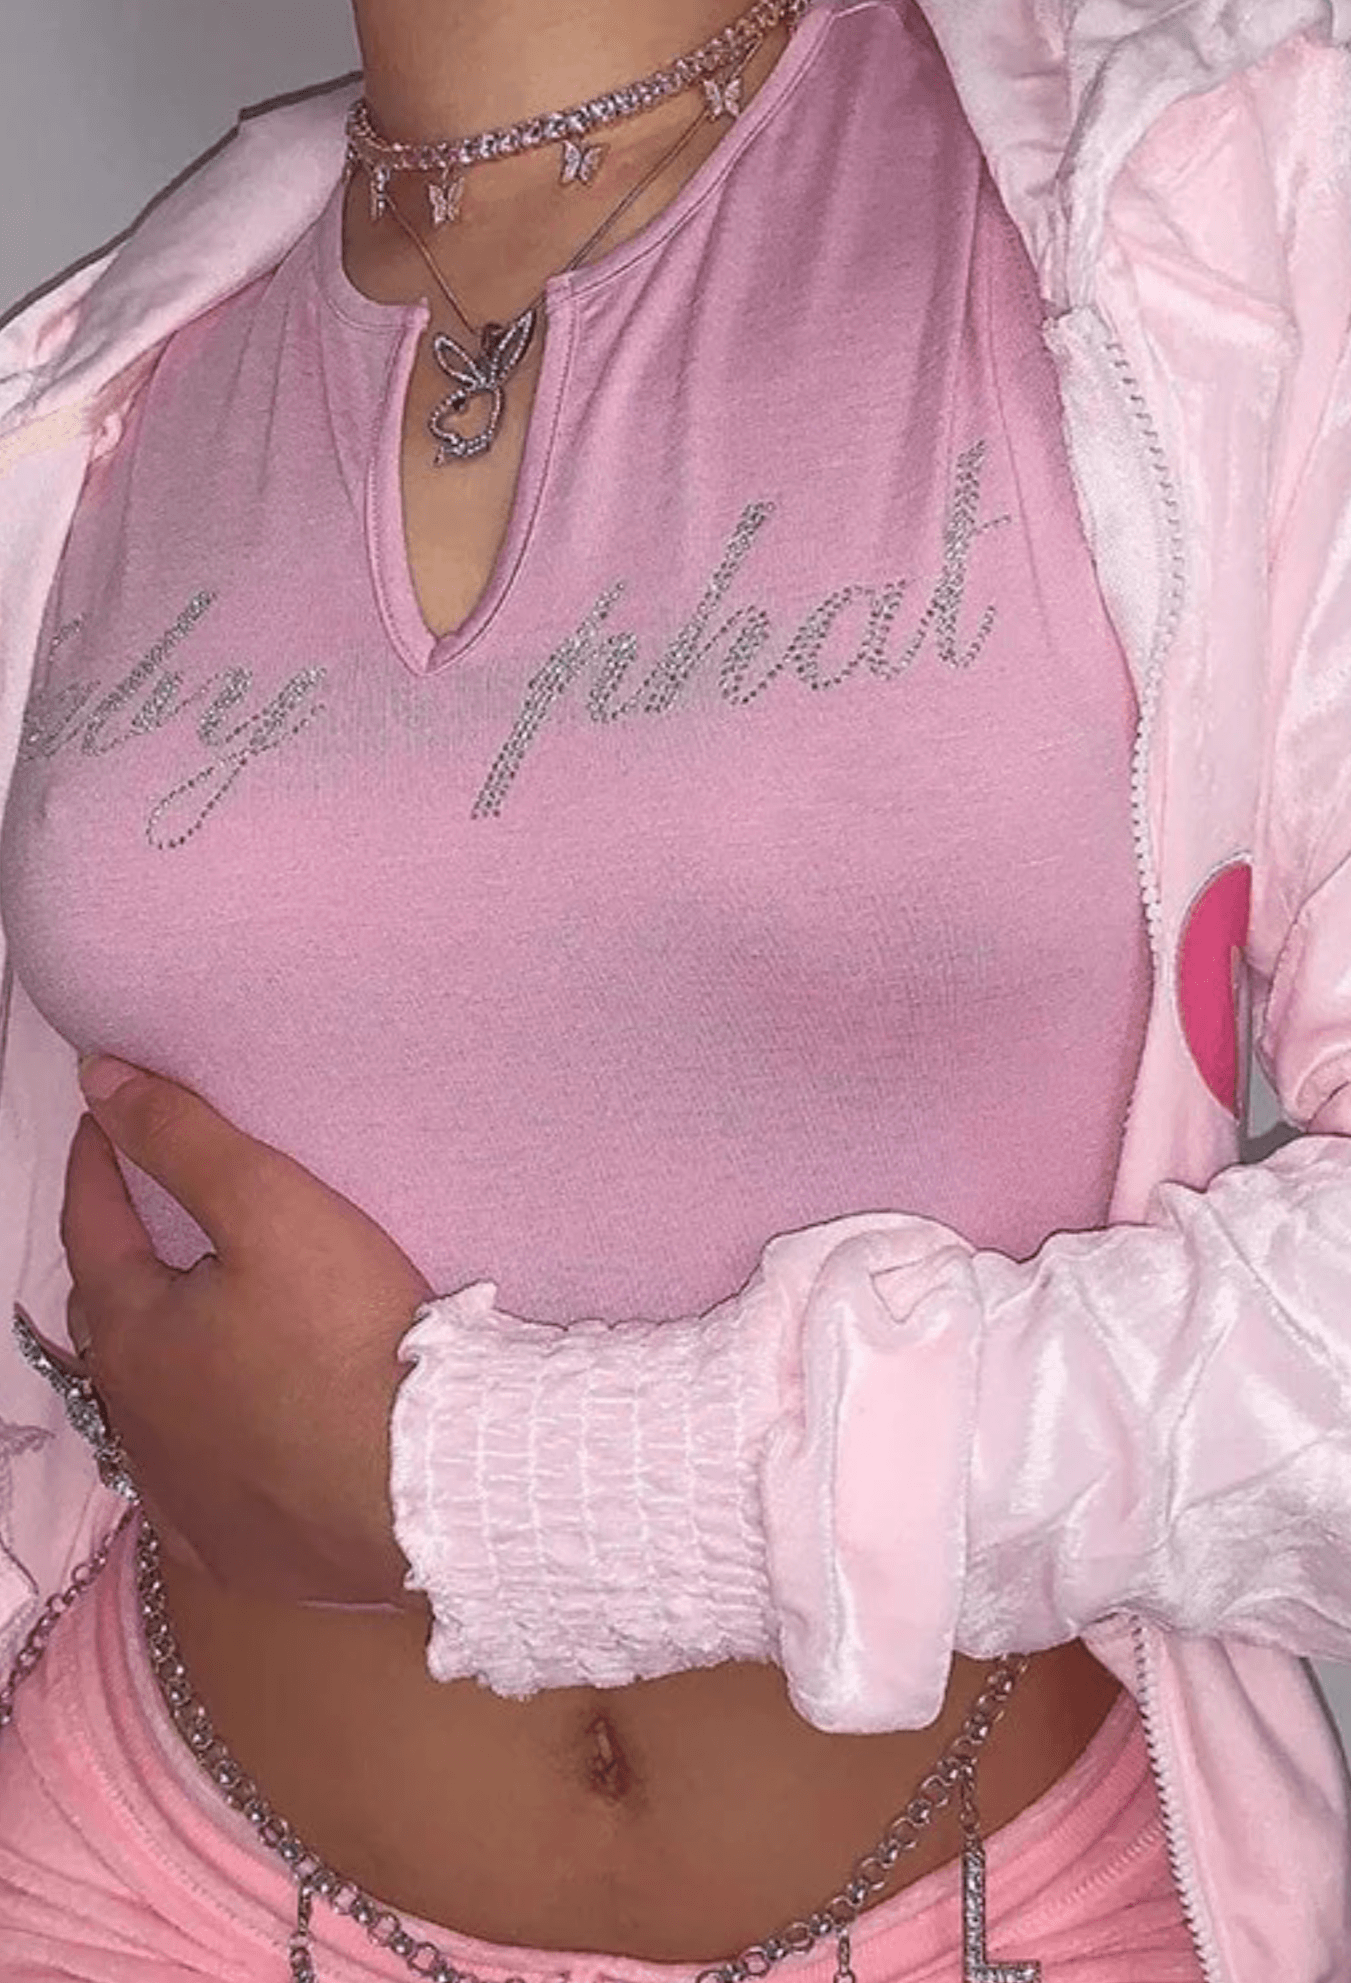 'Baby Phat' Crop Top - shopuntitled.co